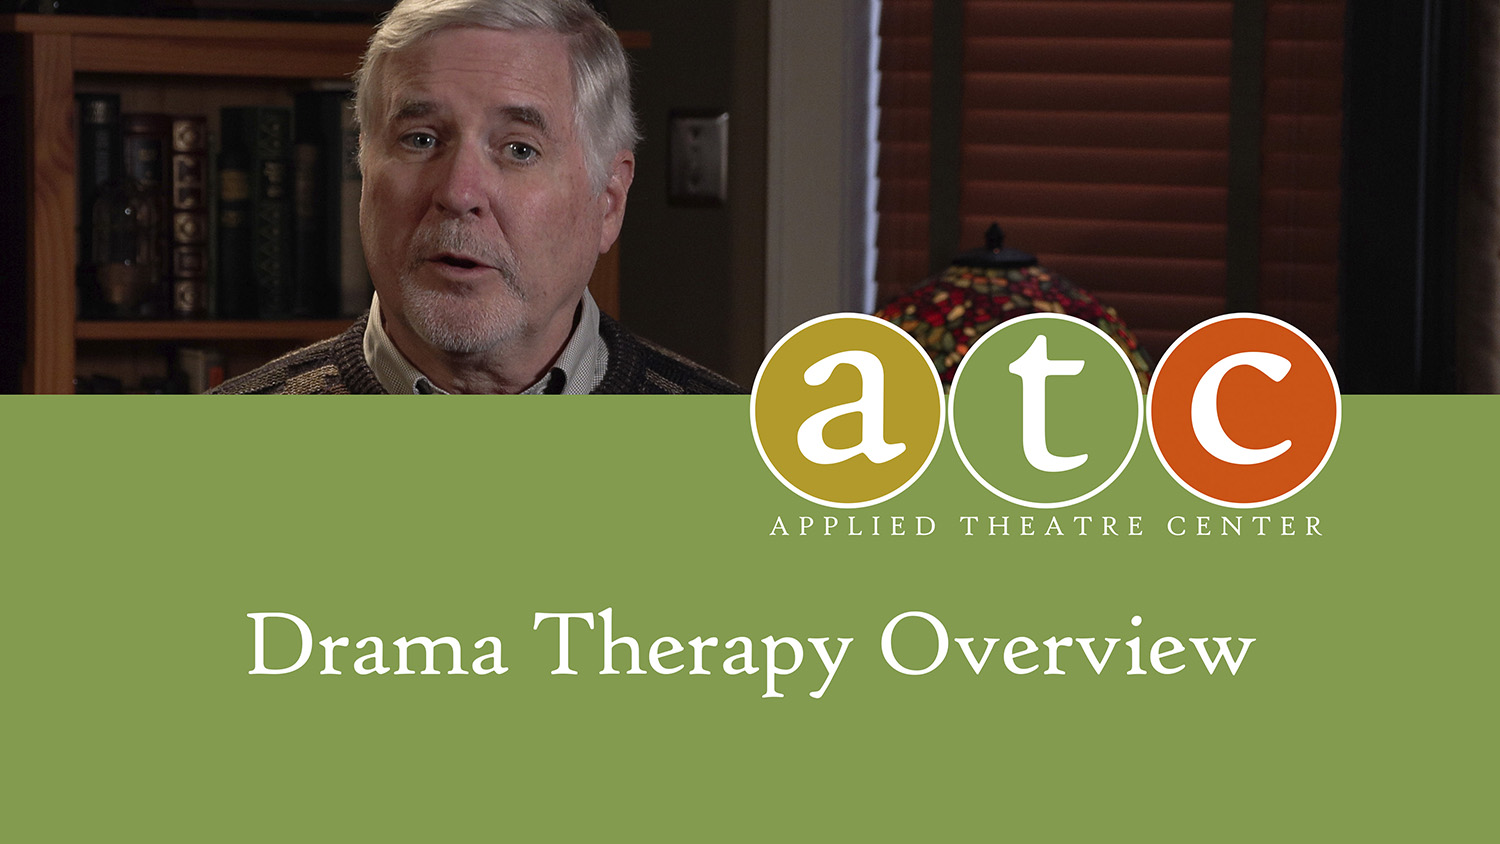 DRAMA THERAPY OVERVIEW